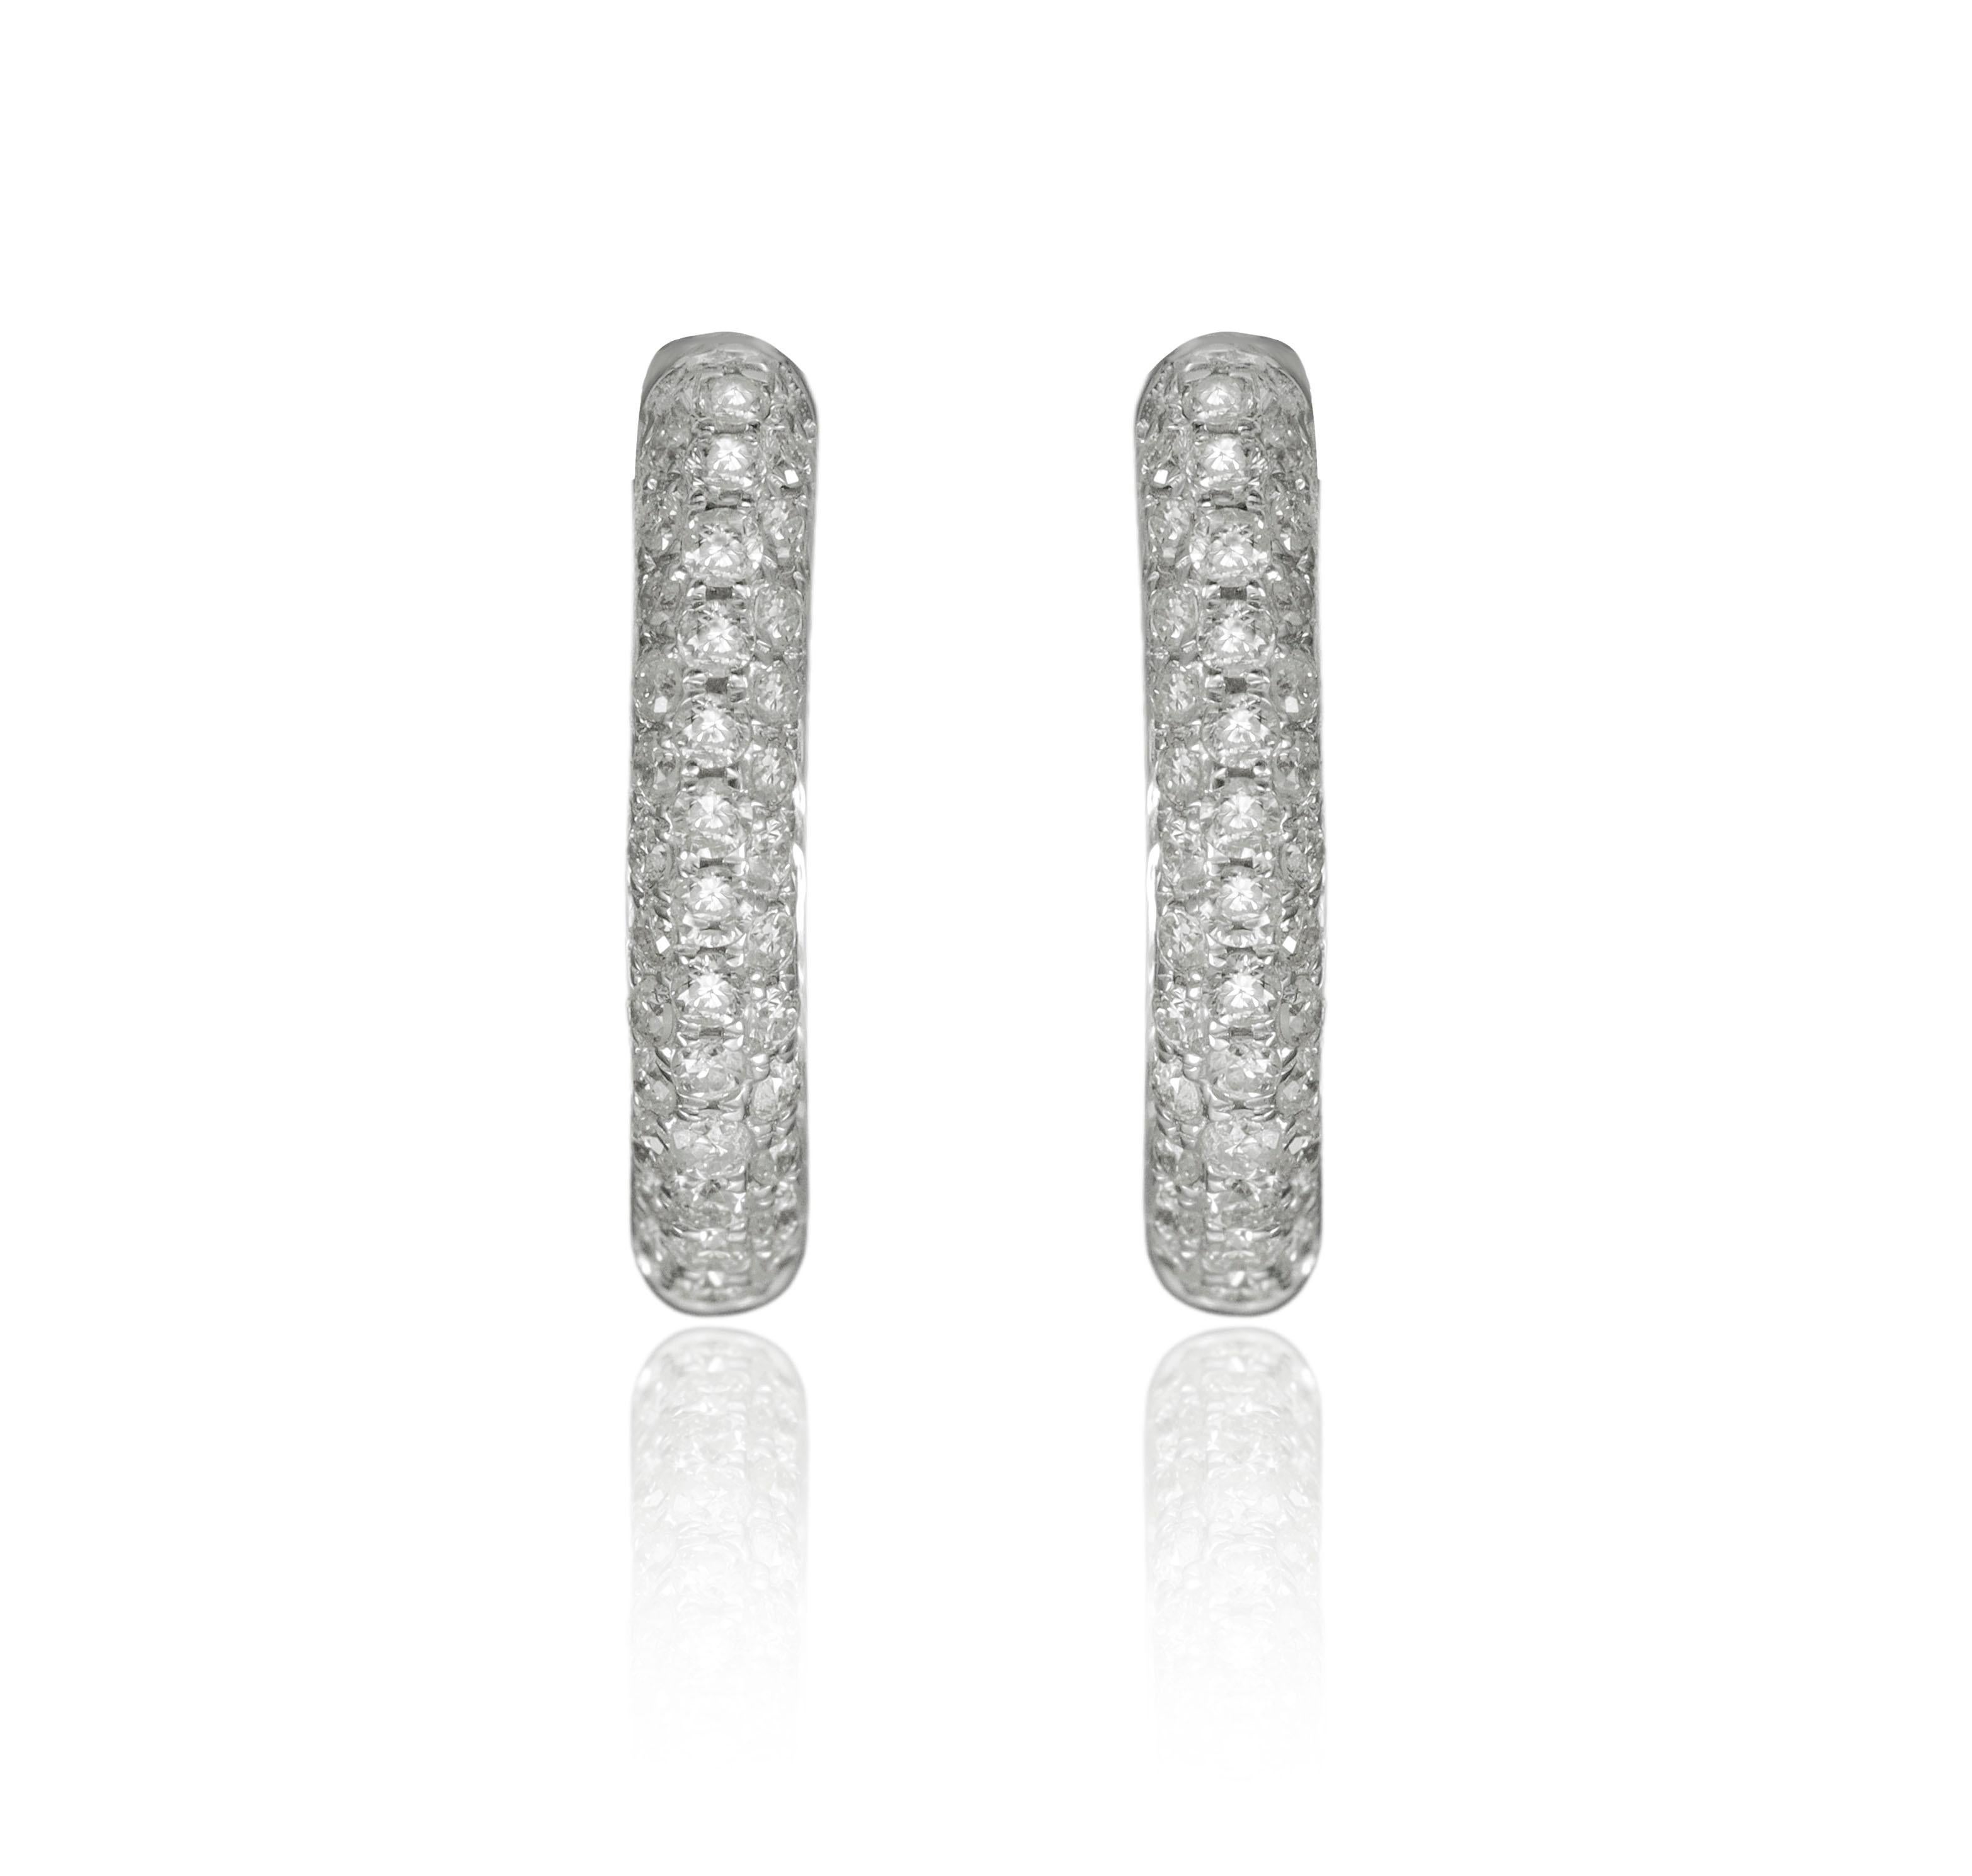 14K White Gold Diamond  Earrings featuring 0.25 Carats of Diamonds

Underline your look with this sharp 14K White gold shape Diamond Earrings. High quality Diamonds. This Earrings will underline your exquisite look for any occasion.

. is a leading